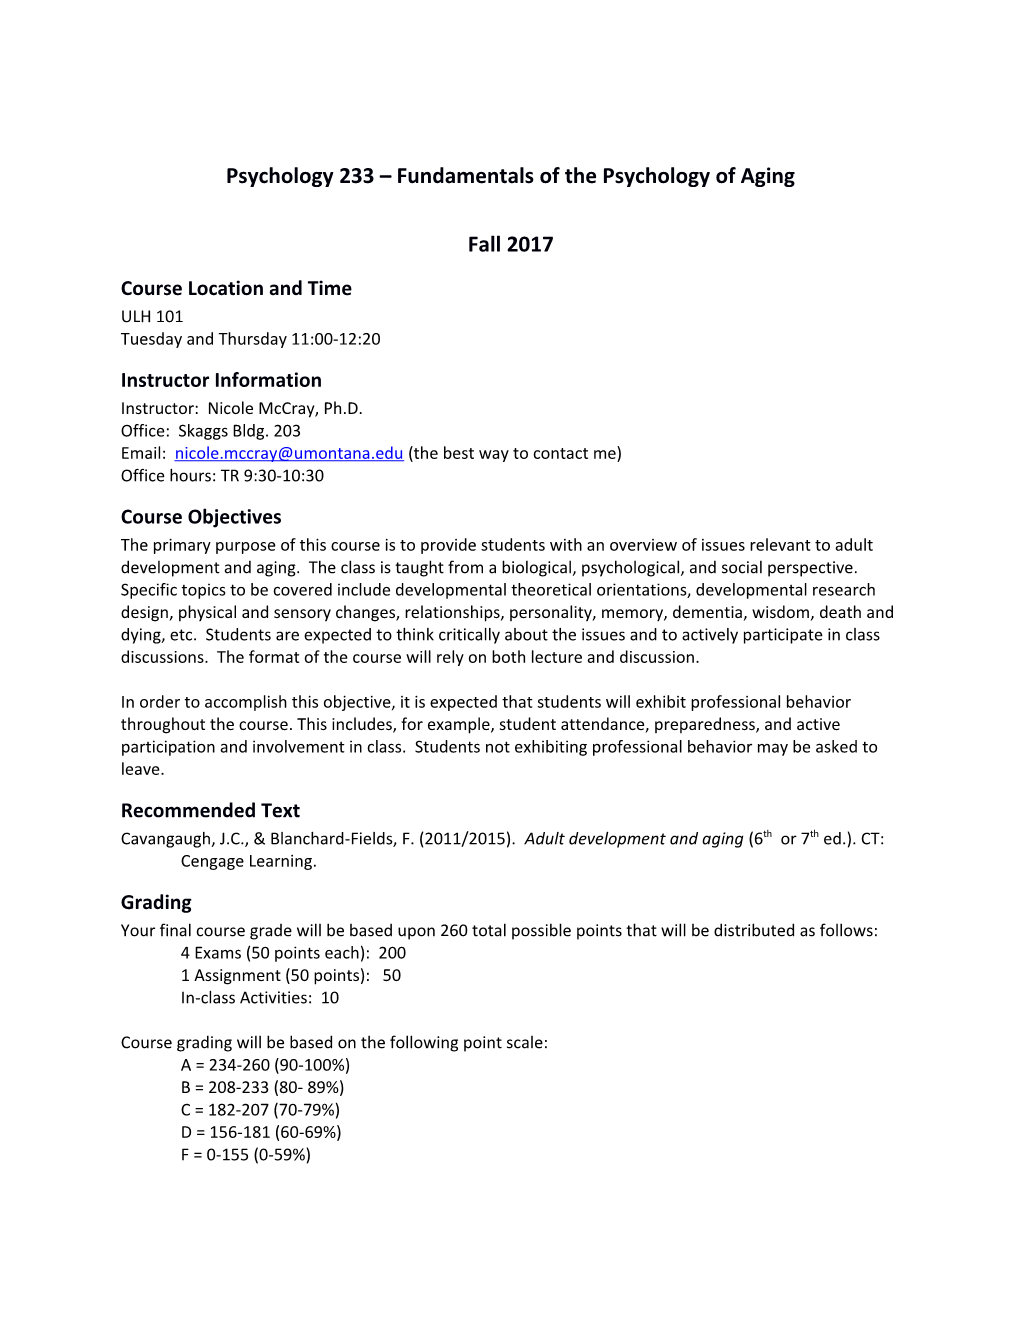 Psychology 233 Fundamentals of the Psychology of Aging